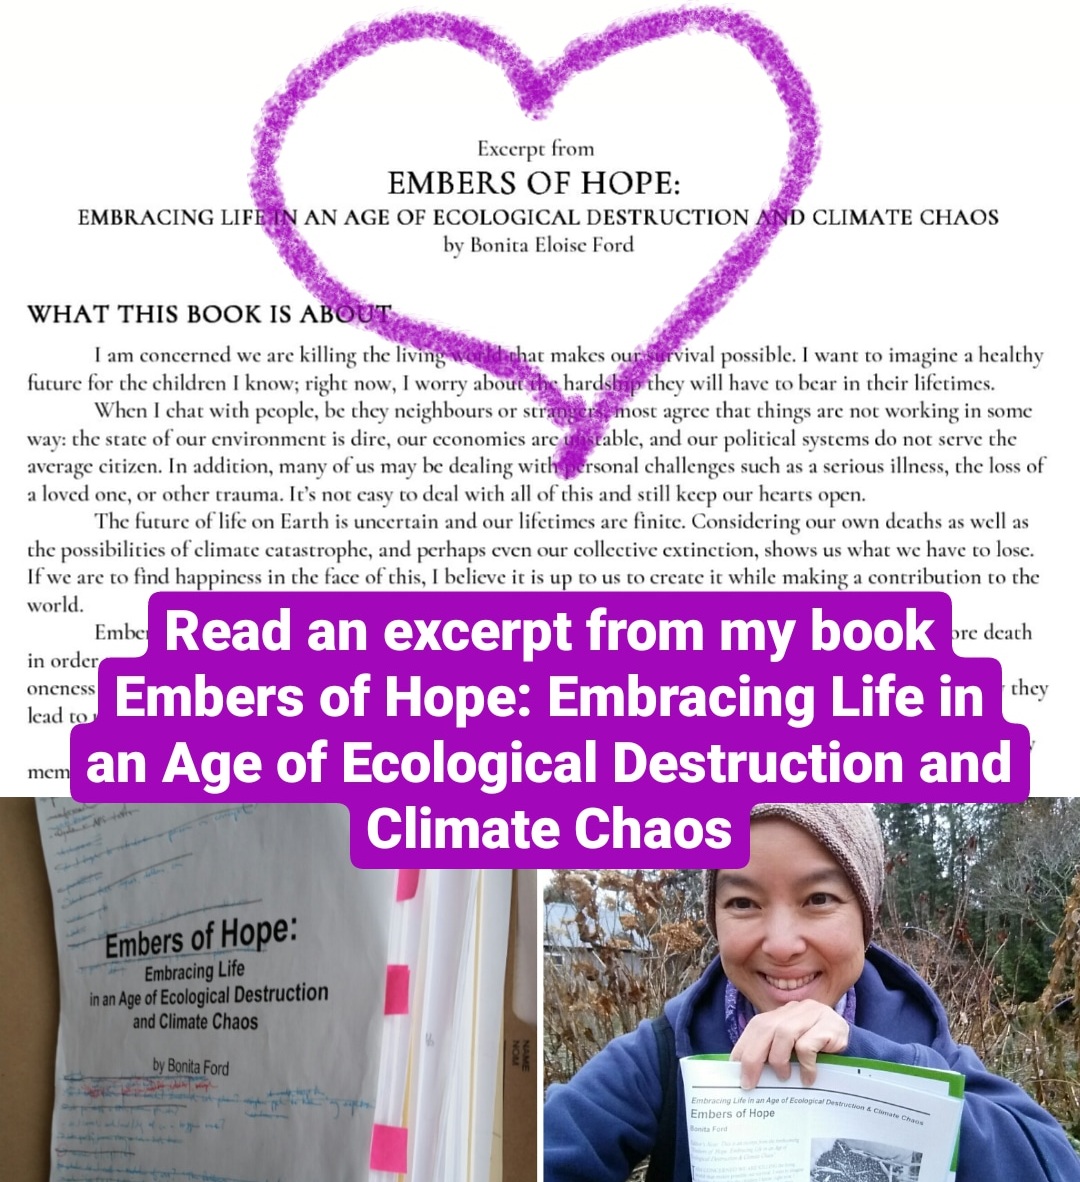 "Embers of Hope: Embracing Life in an Age of Ecological Crisis and Climate Chaos" book excerpt, by Bonita Eloise Ford.